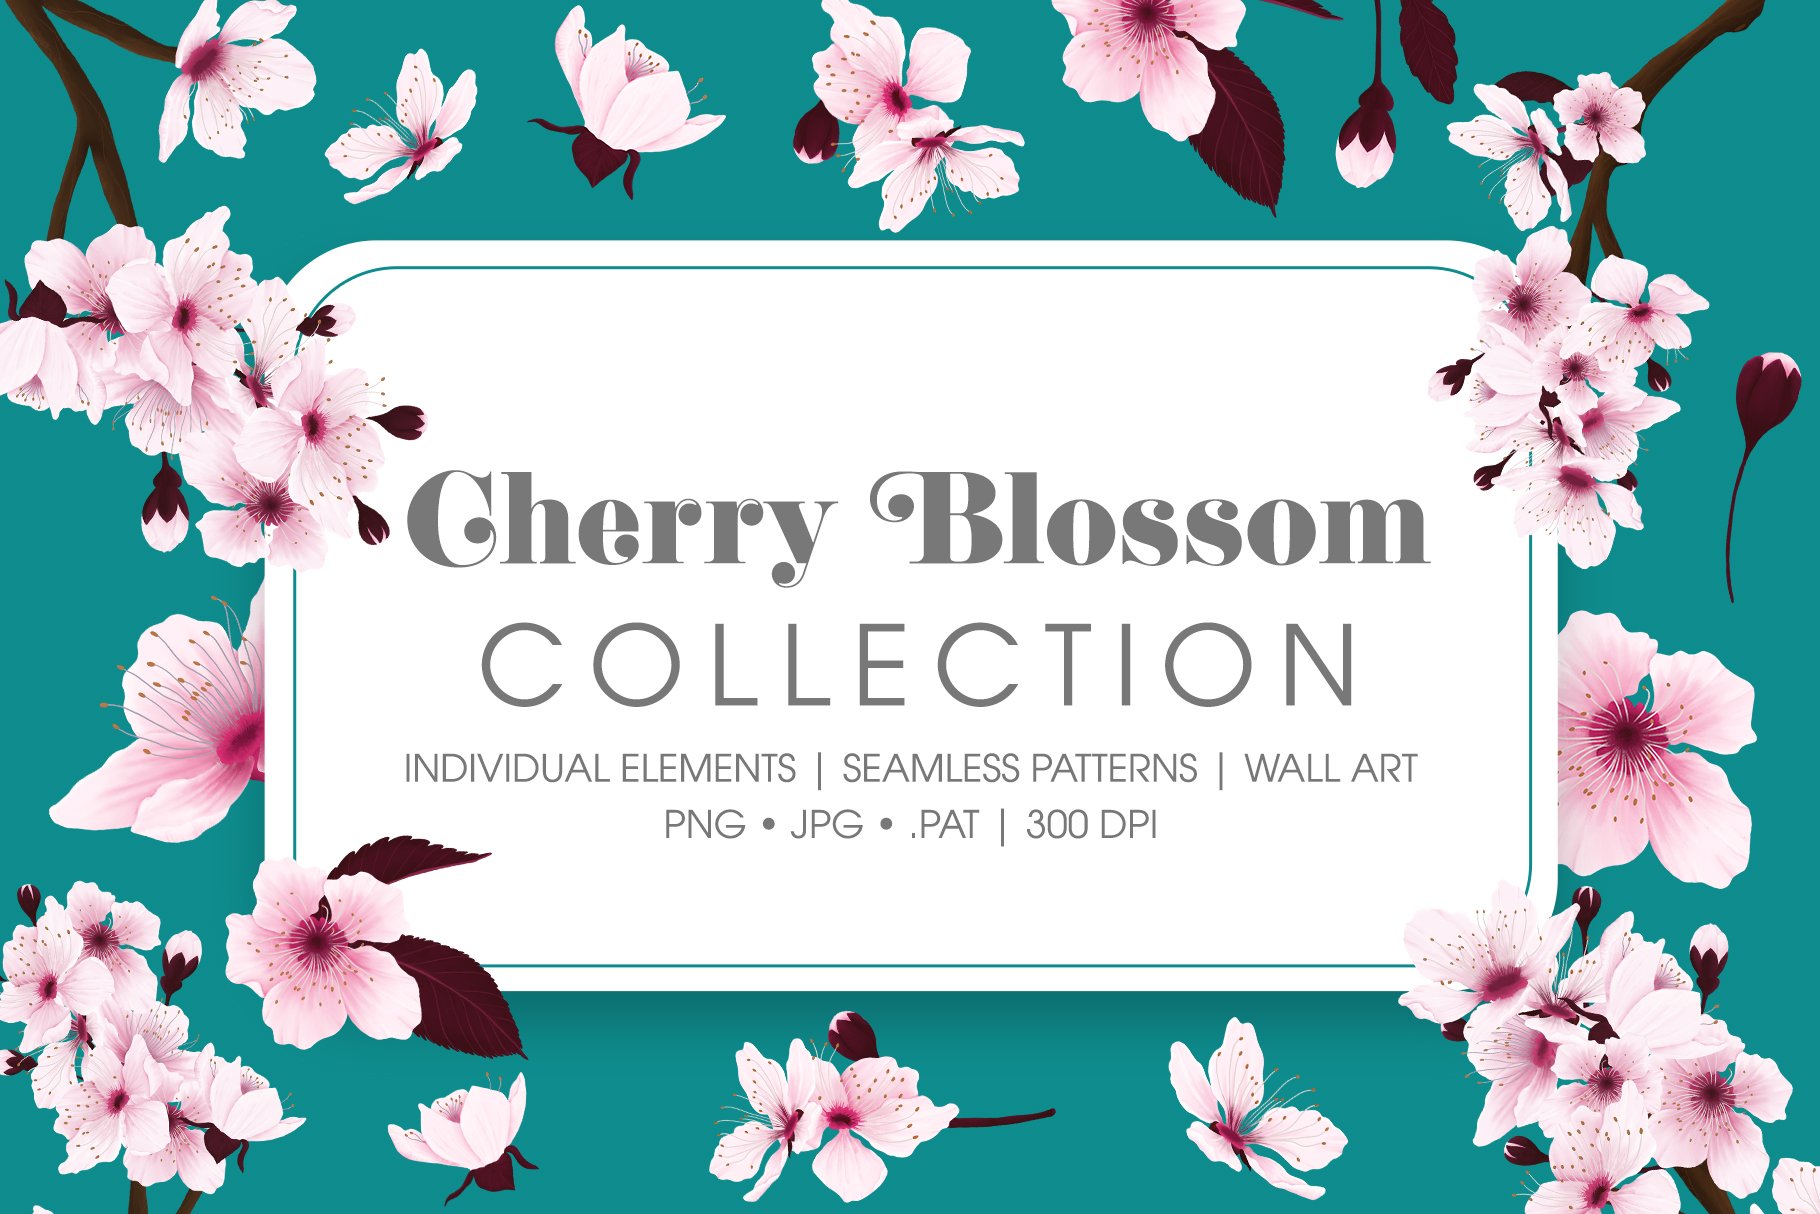 b blossom collection